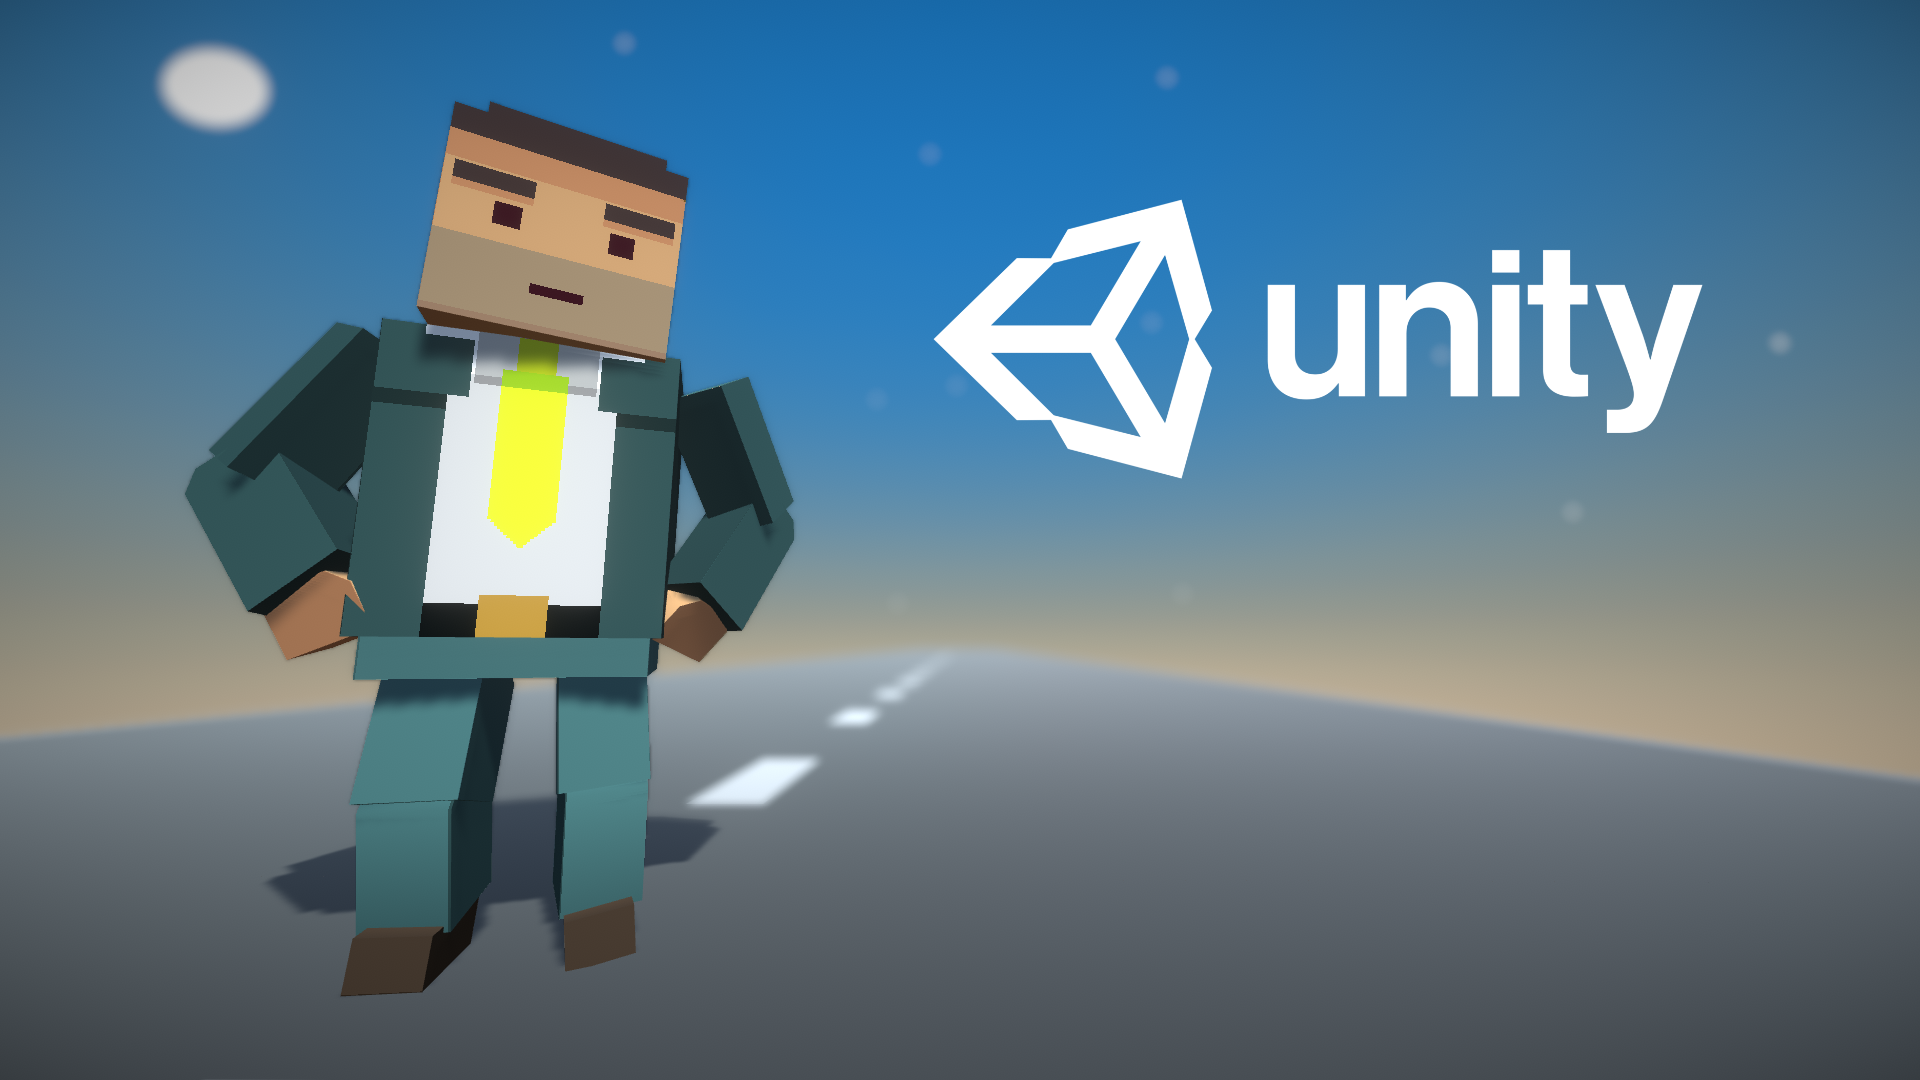 Junior Programmer Create With Code 1 Unity Learn